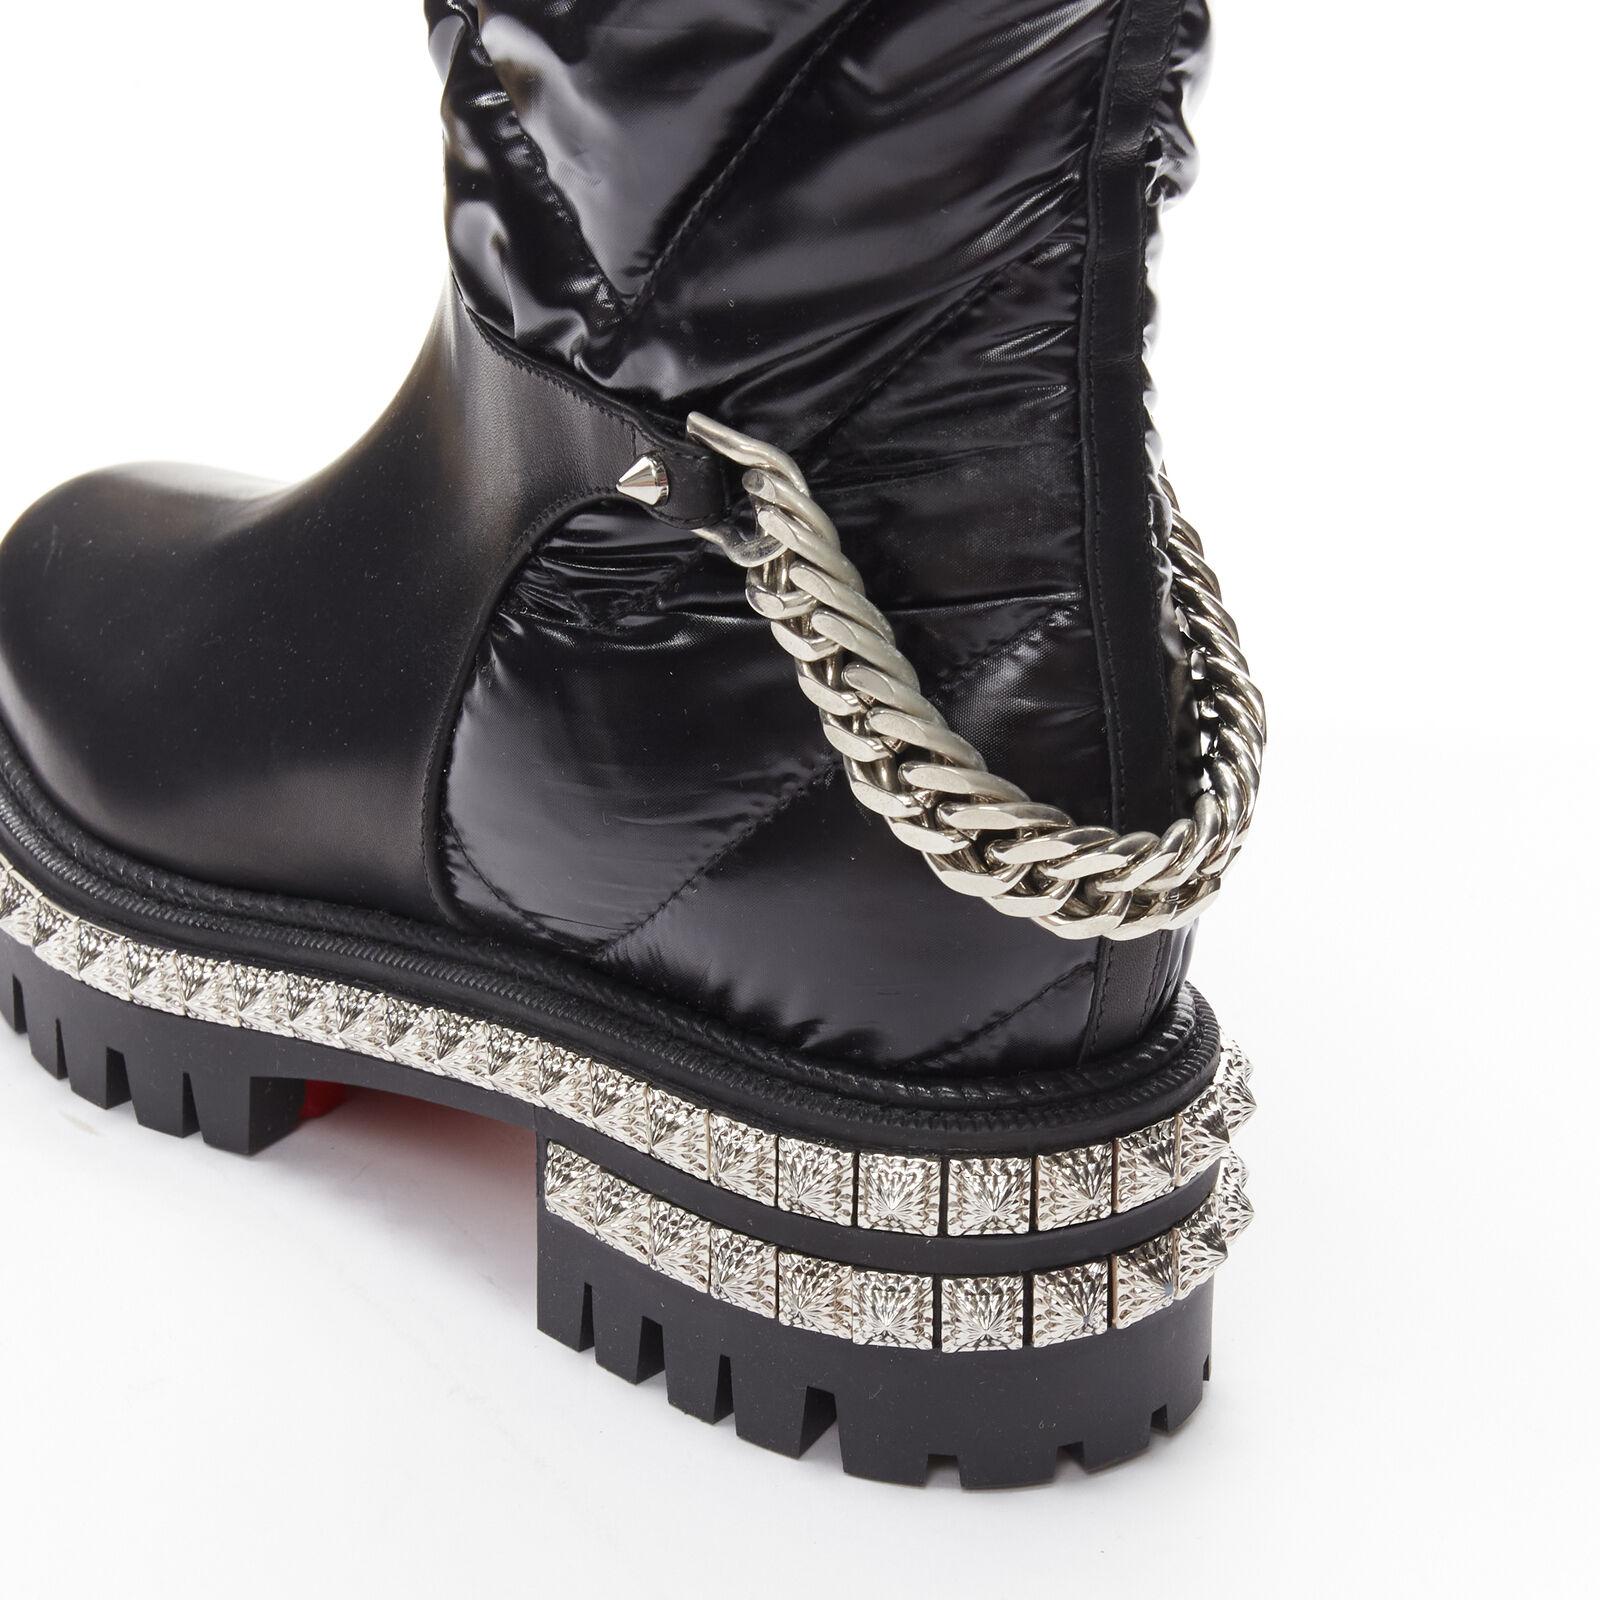 new CHRISTIAN LOUBOUTIN Verdonna Flat black leather nylon chain boot EU39
Reference: TGAS/C01486
Brand: Christian Louboutin
Model: Verdonna Flat
Material: Calfskin Leather, Down
Color: Black, Silver
Pattern: Solid
Closure: Pull On
Lining: